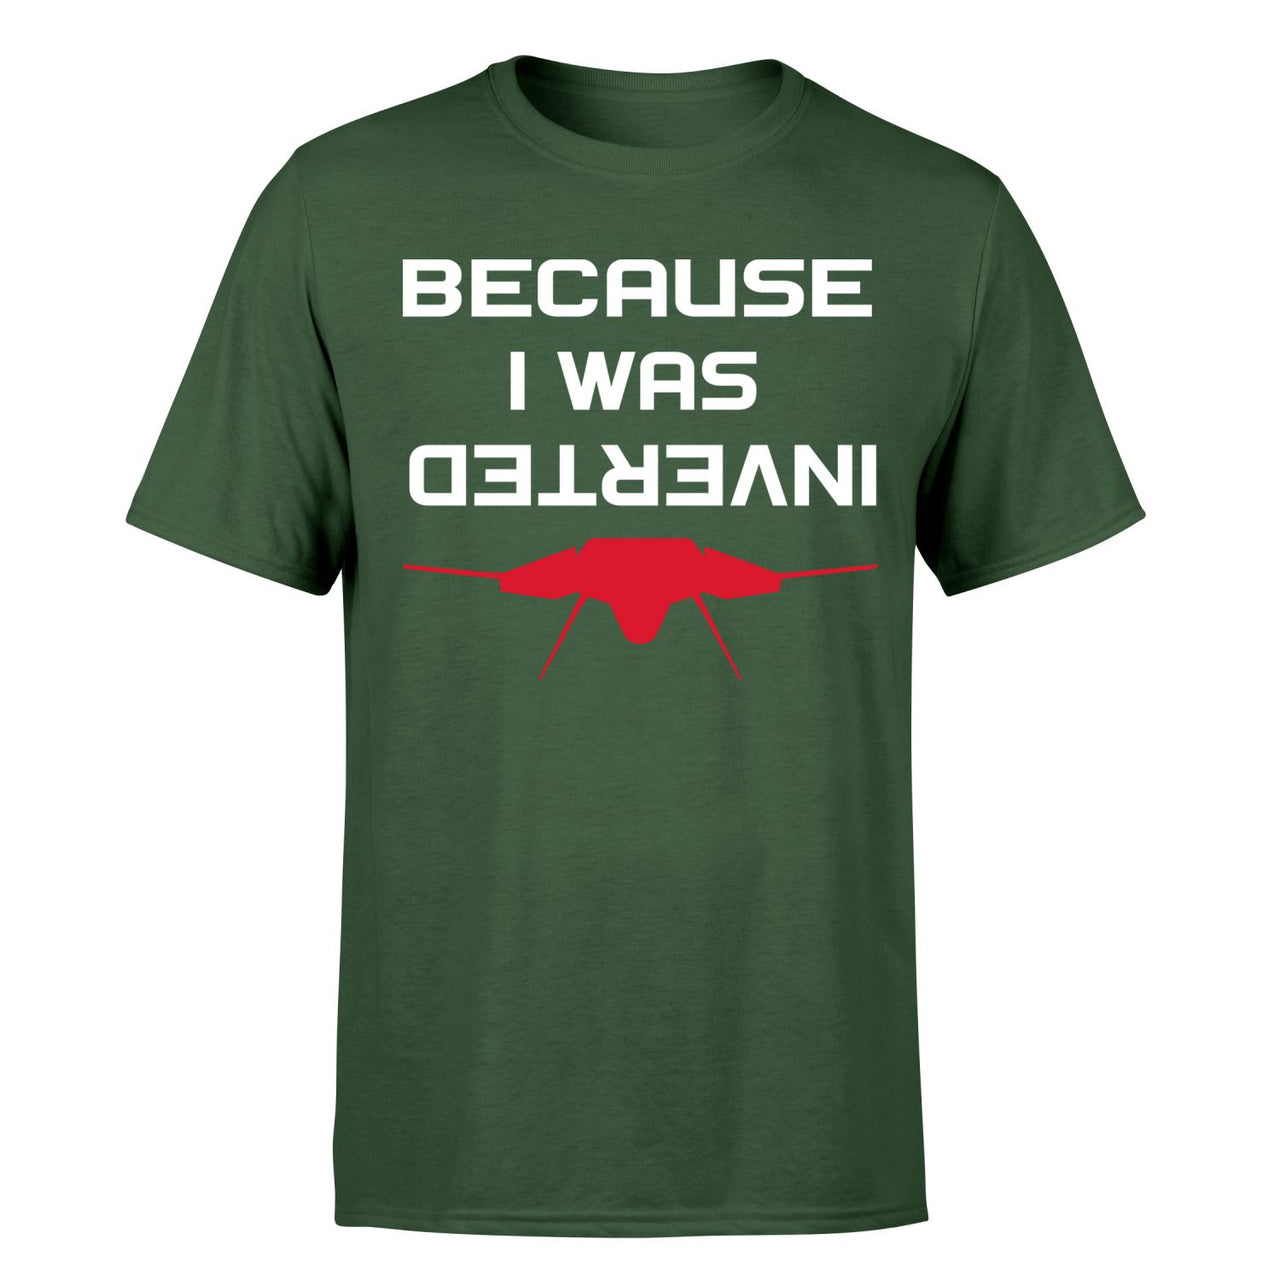 Because I was Inverted Designed T-Shirts